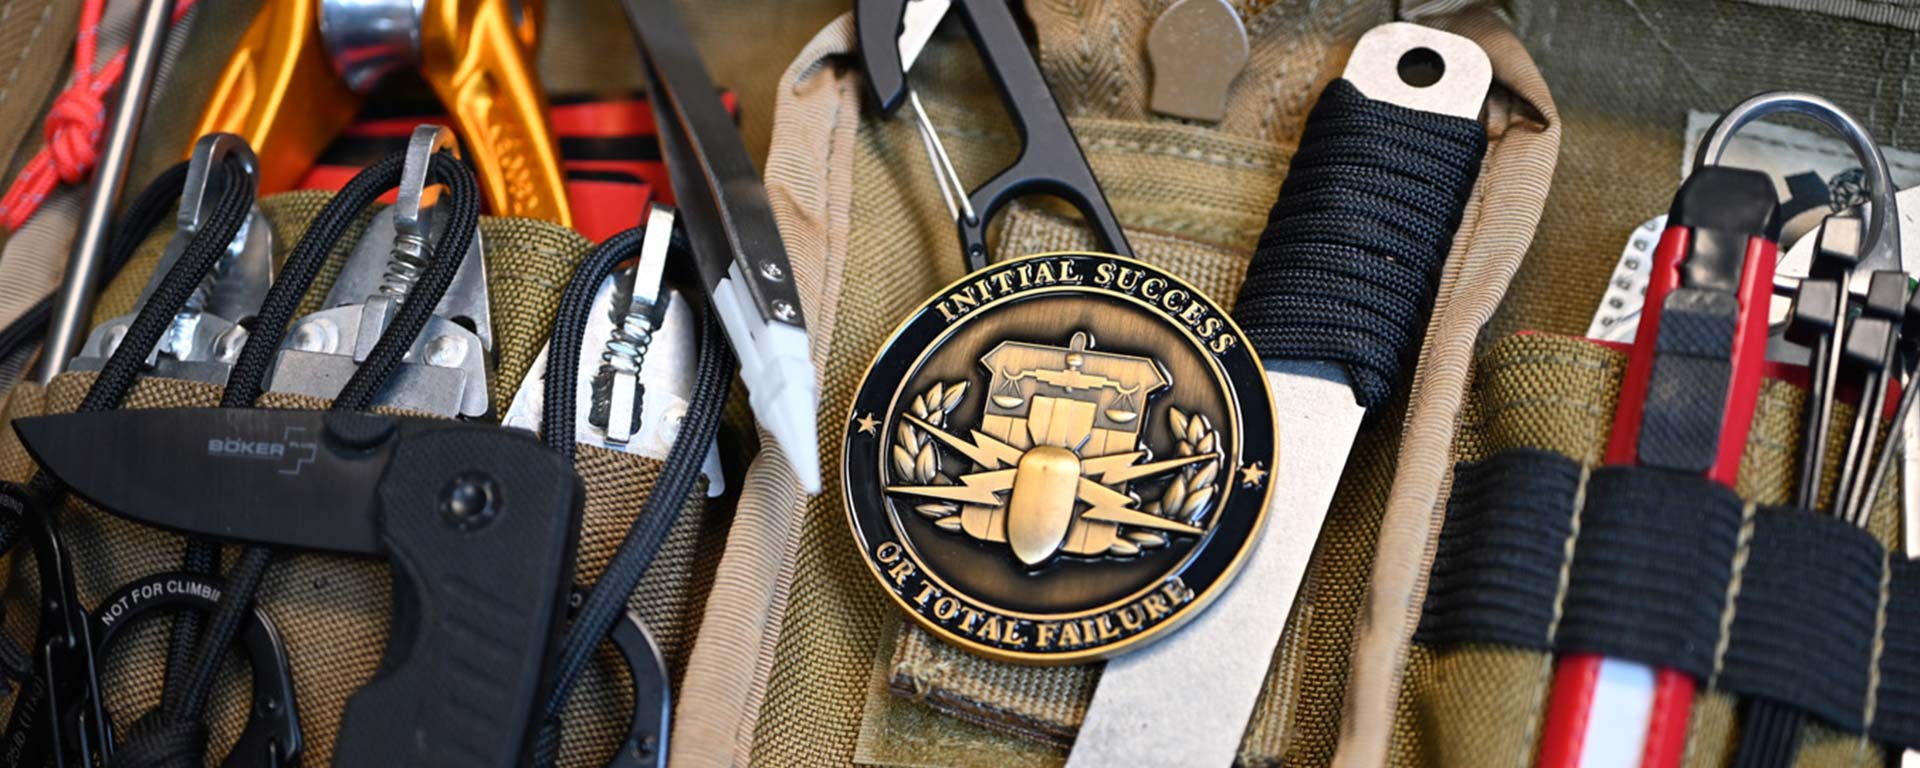 Military themed challenge coin alongside assorted pieces of military gear.